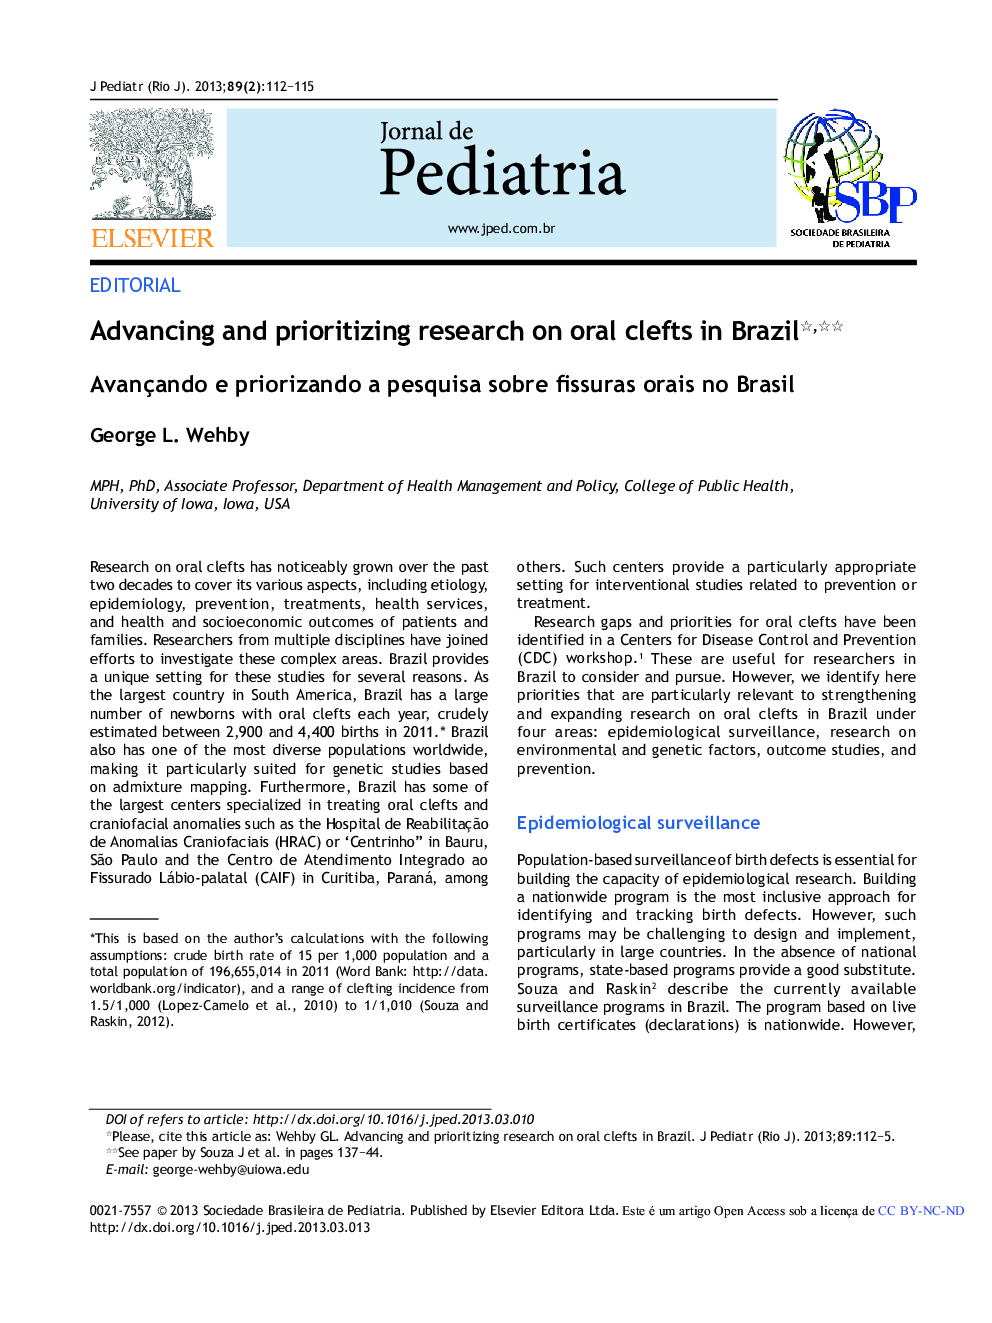 Advancing and prioritizing research on oral clefts in Brazil